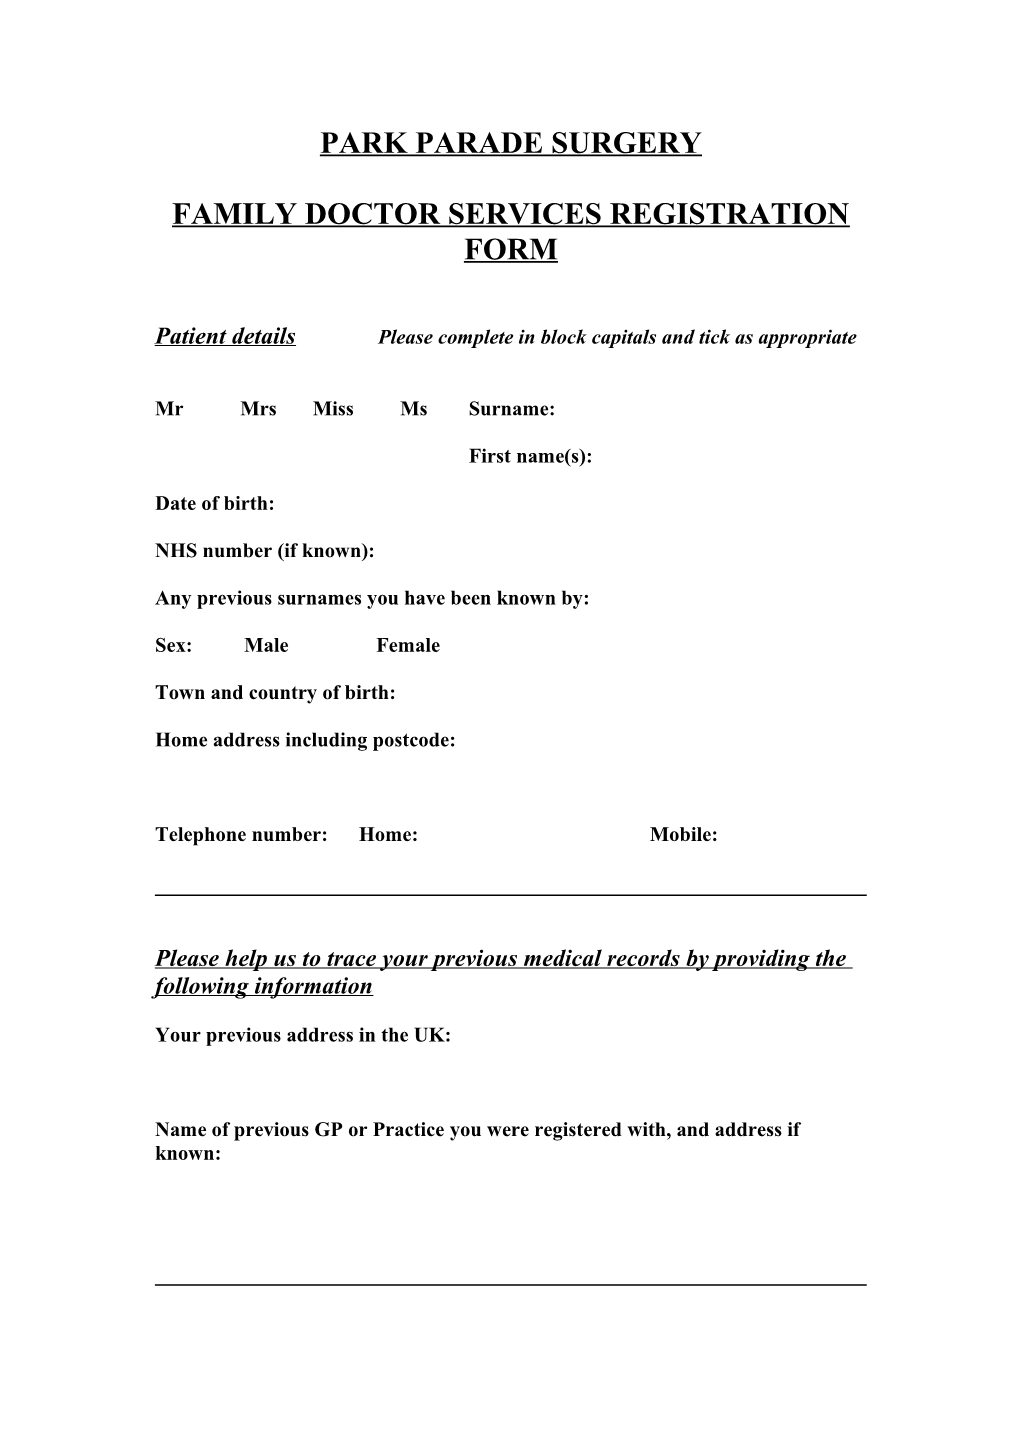 Family Doctor Services Registration